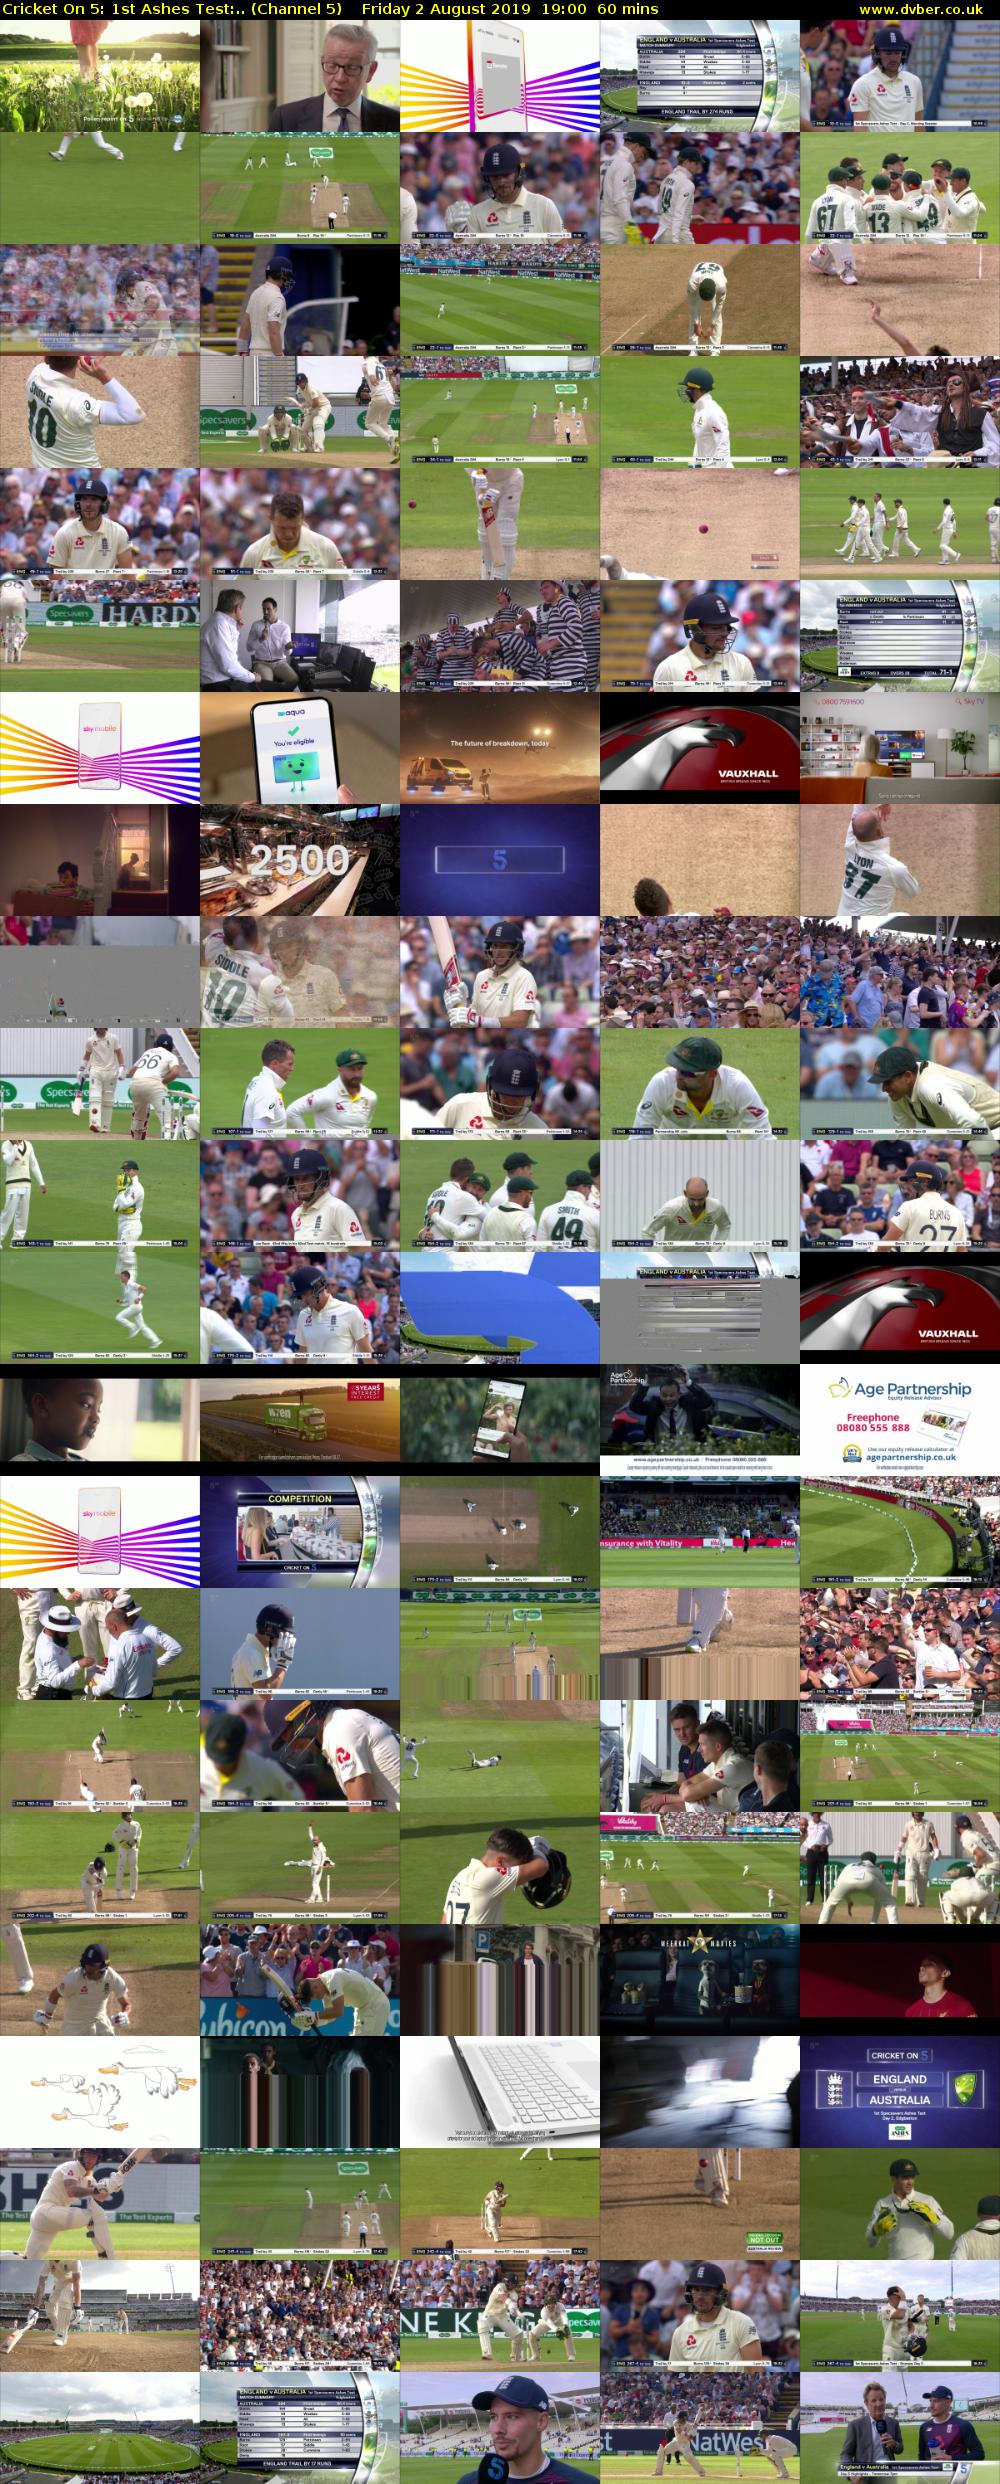 Cricket On 5: 1st Ashes Test:.. (Channel 5) Friday 2 August 2019 19:00 - 20:00